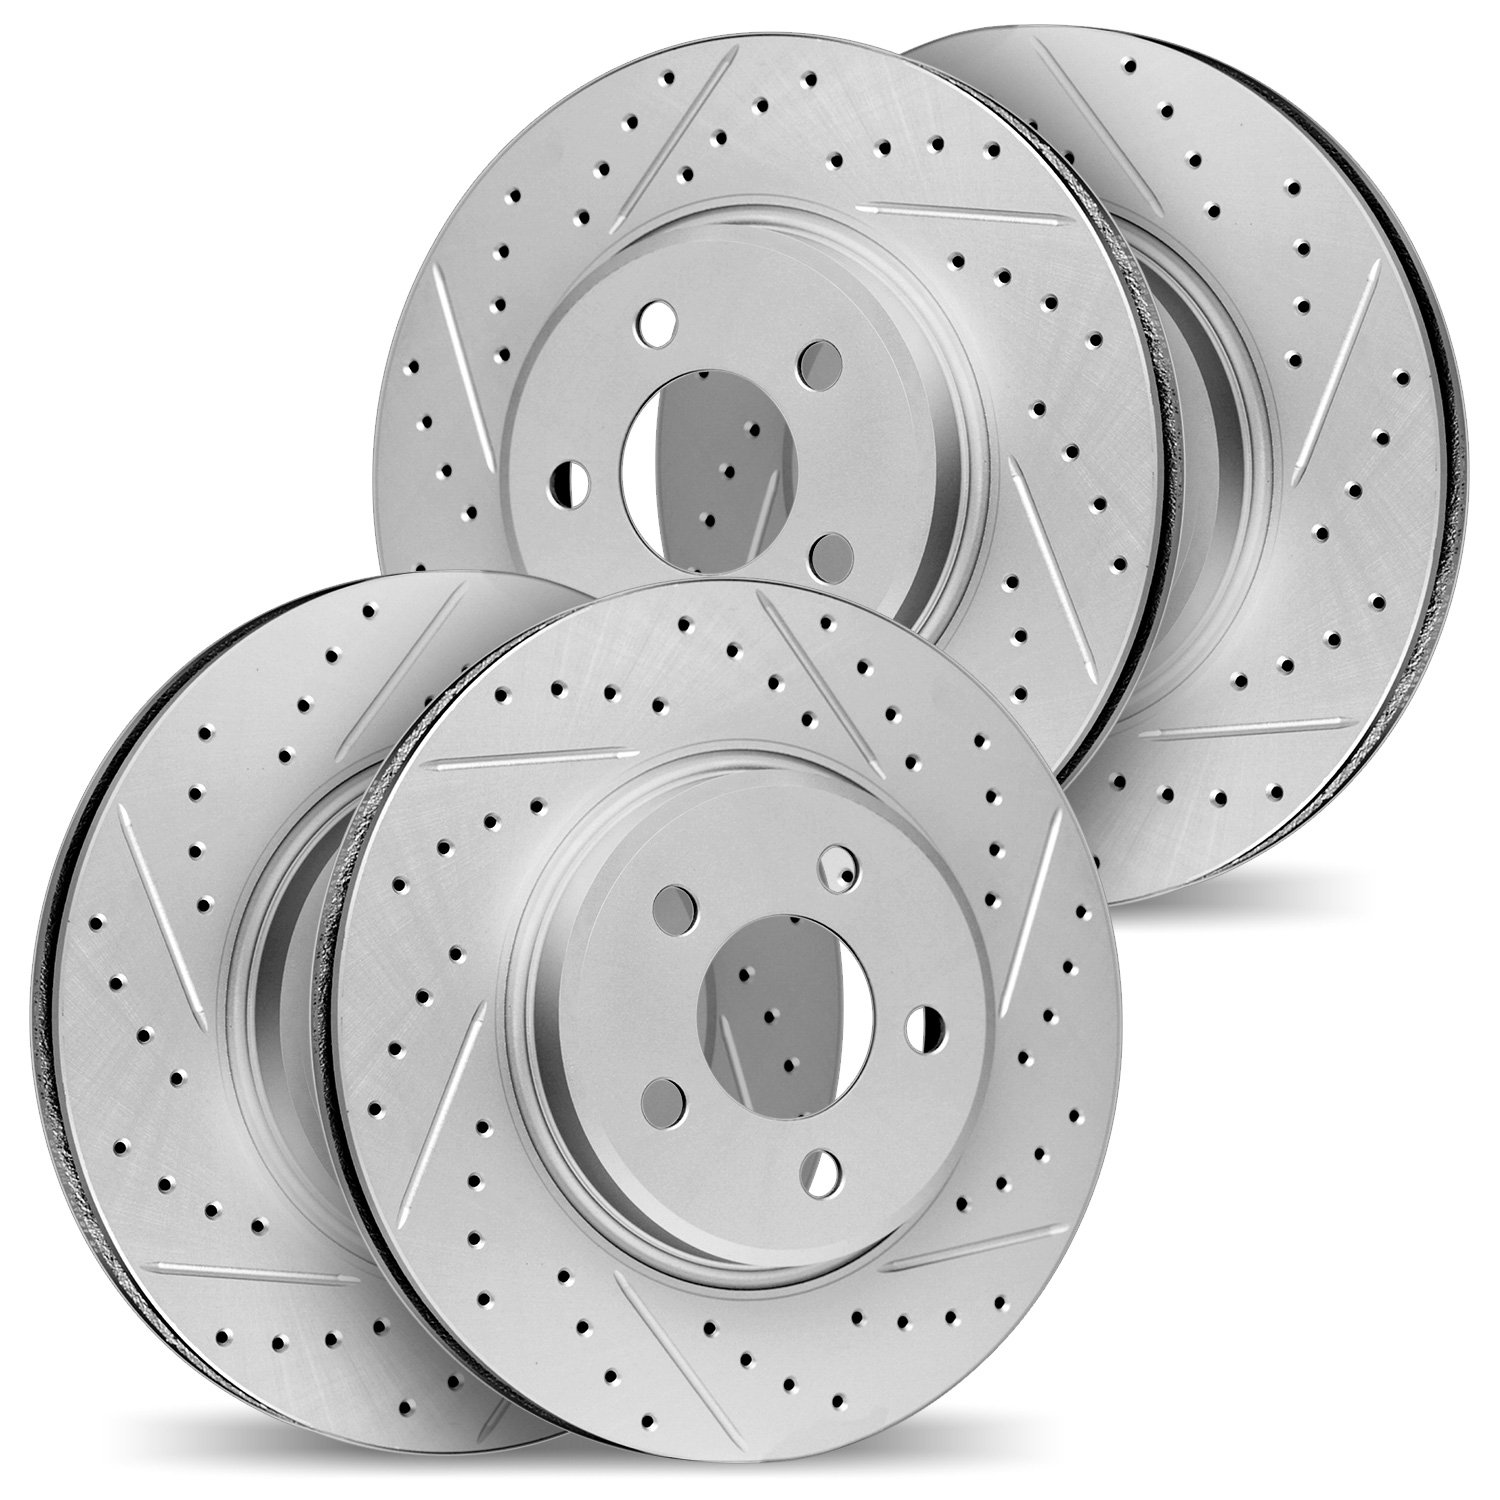 2004-67014 Geoperformance Drilled/Slotted Brake Rotors, 2016-2017 Infiniti/Nissan, Position: Front and Rear